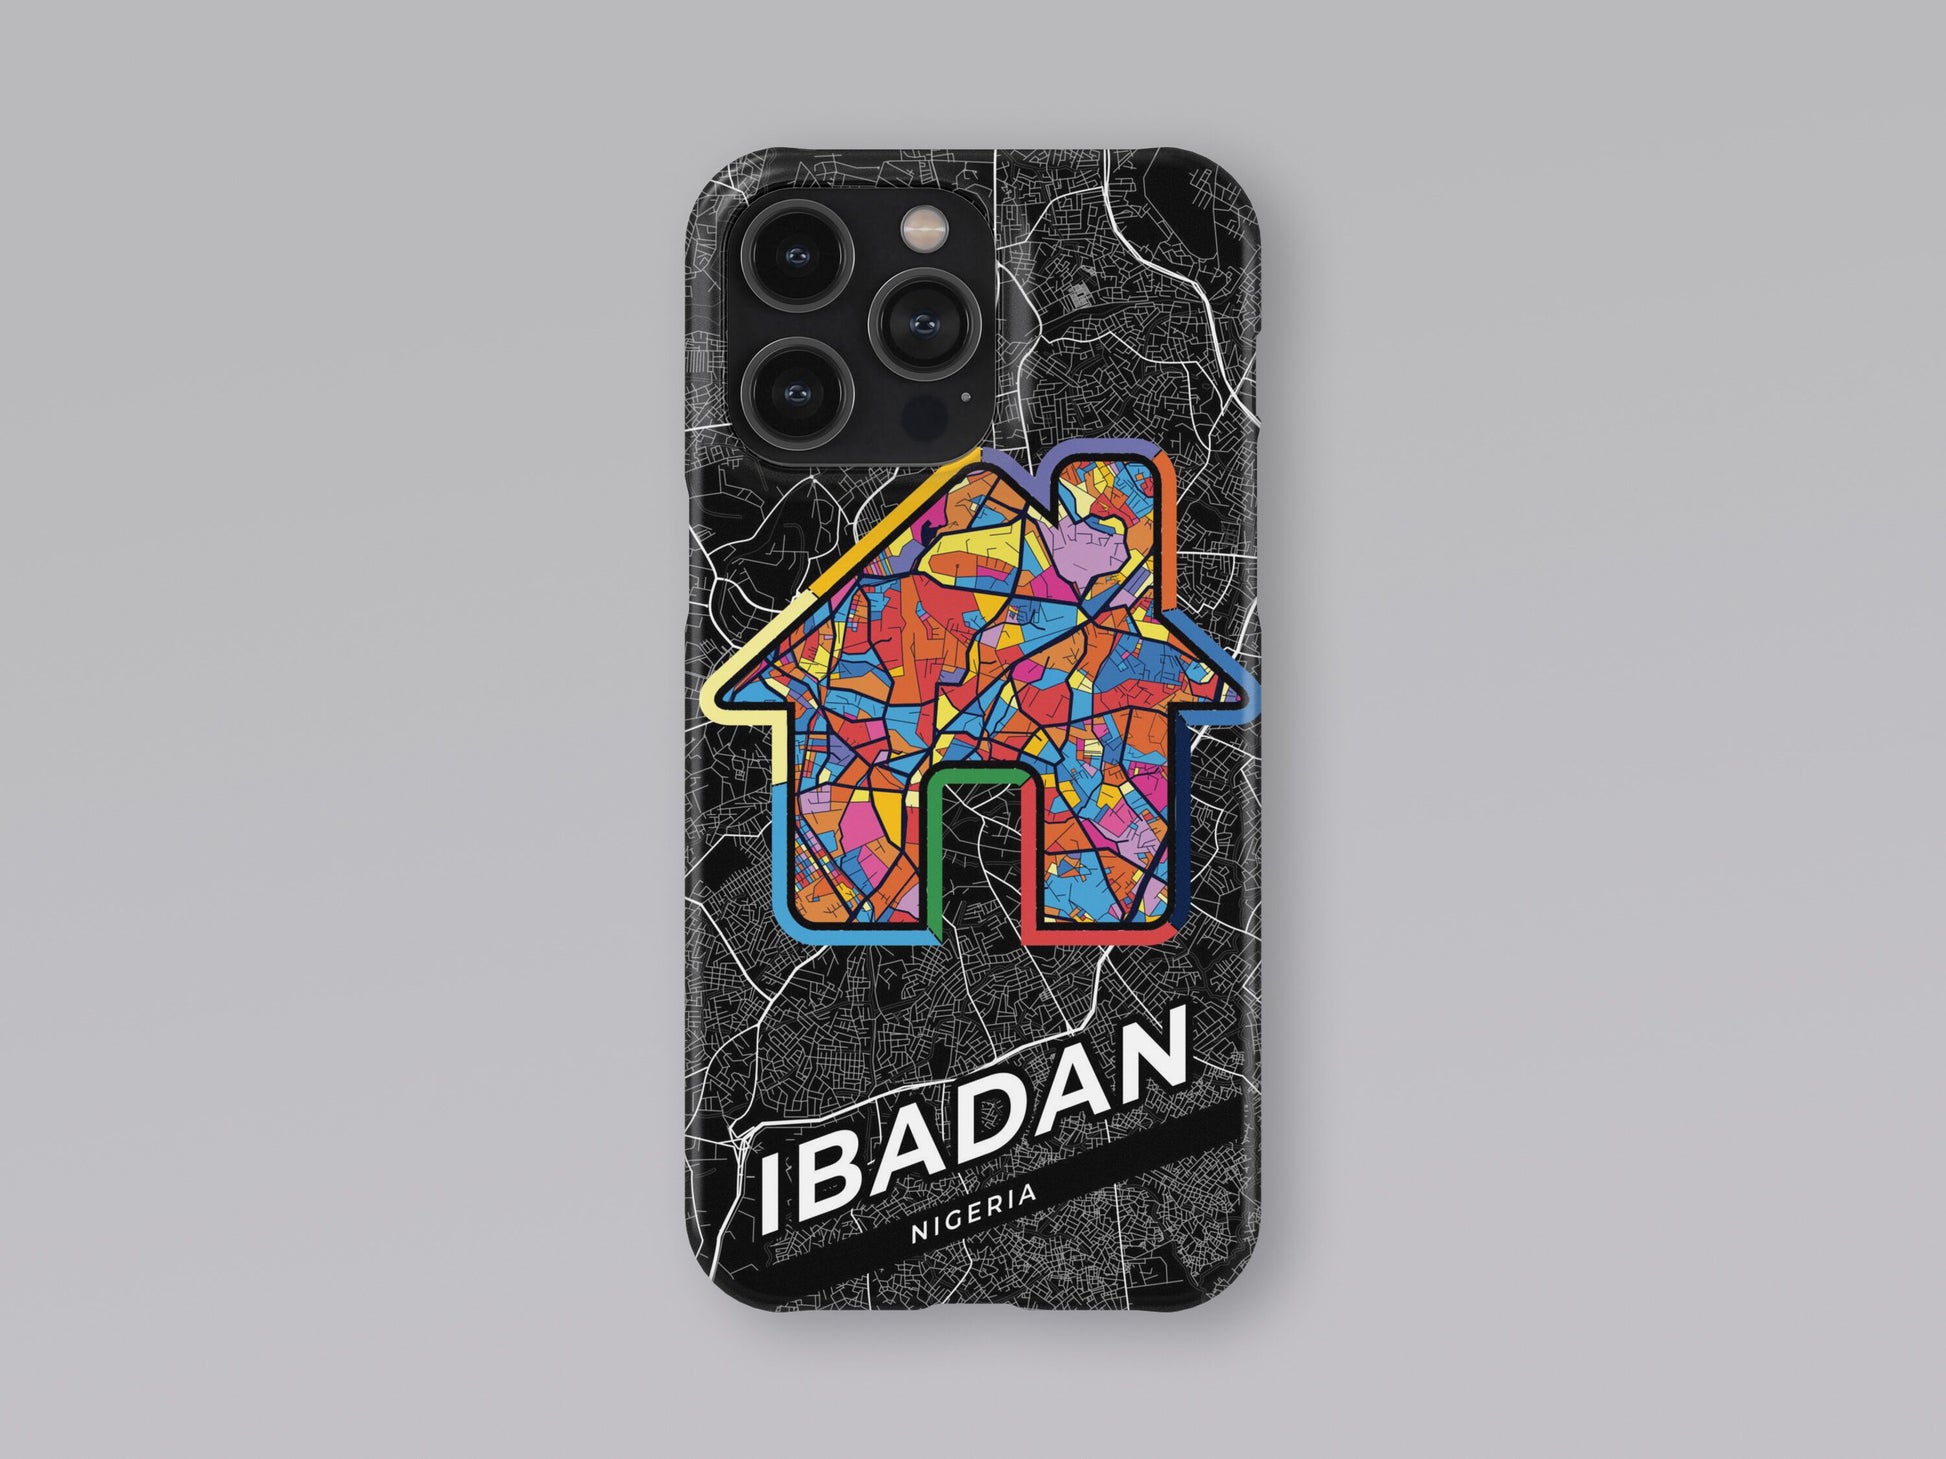 Ibadan Nigeria slim phone case with colorful icon. Birthday, wedding or housewarming gift. Couple match cases. 3